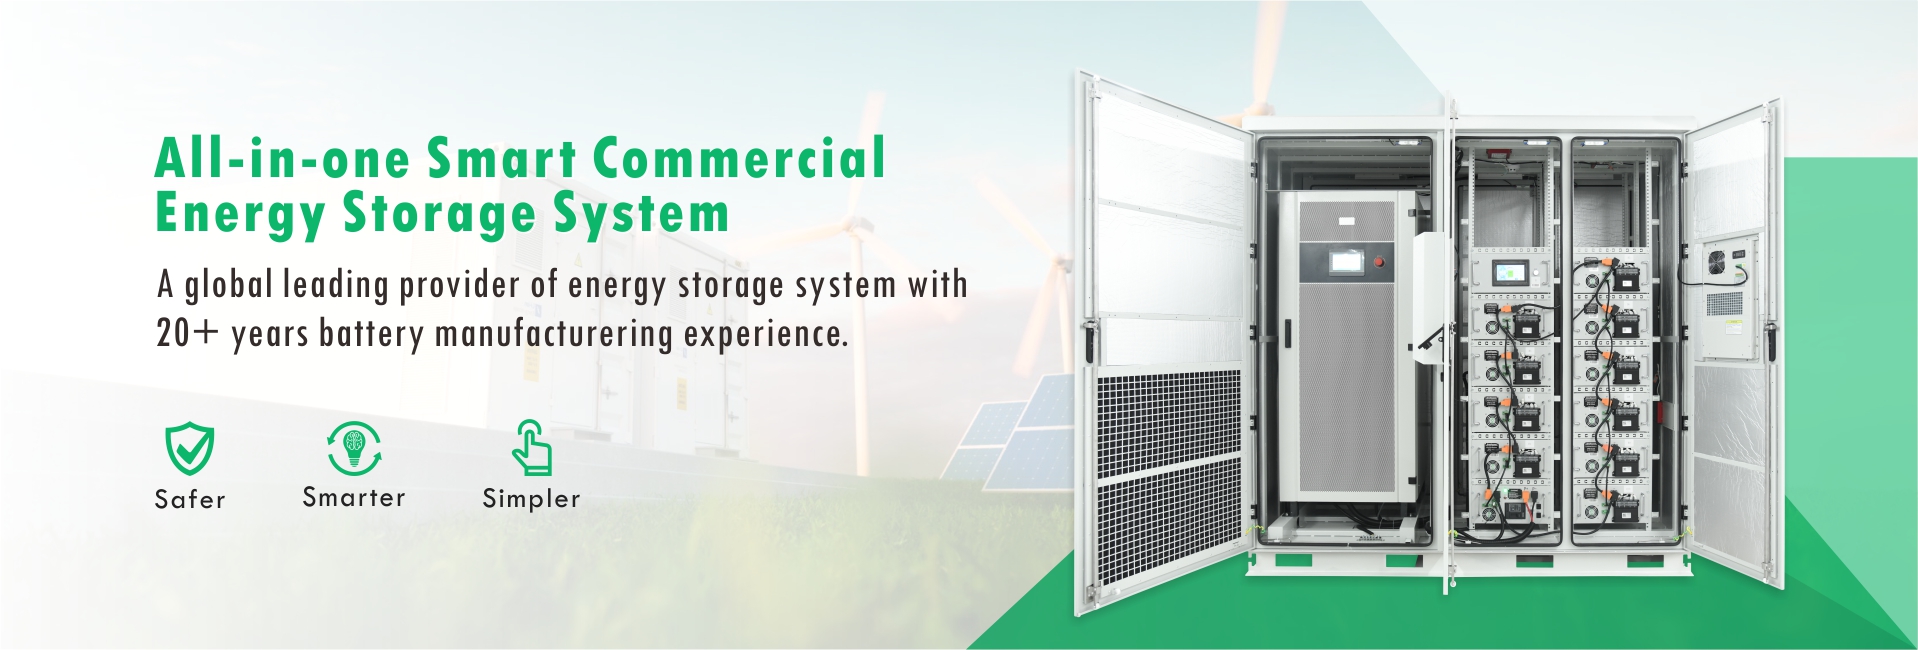 All-in-one Smart Commercial Energy Storage System